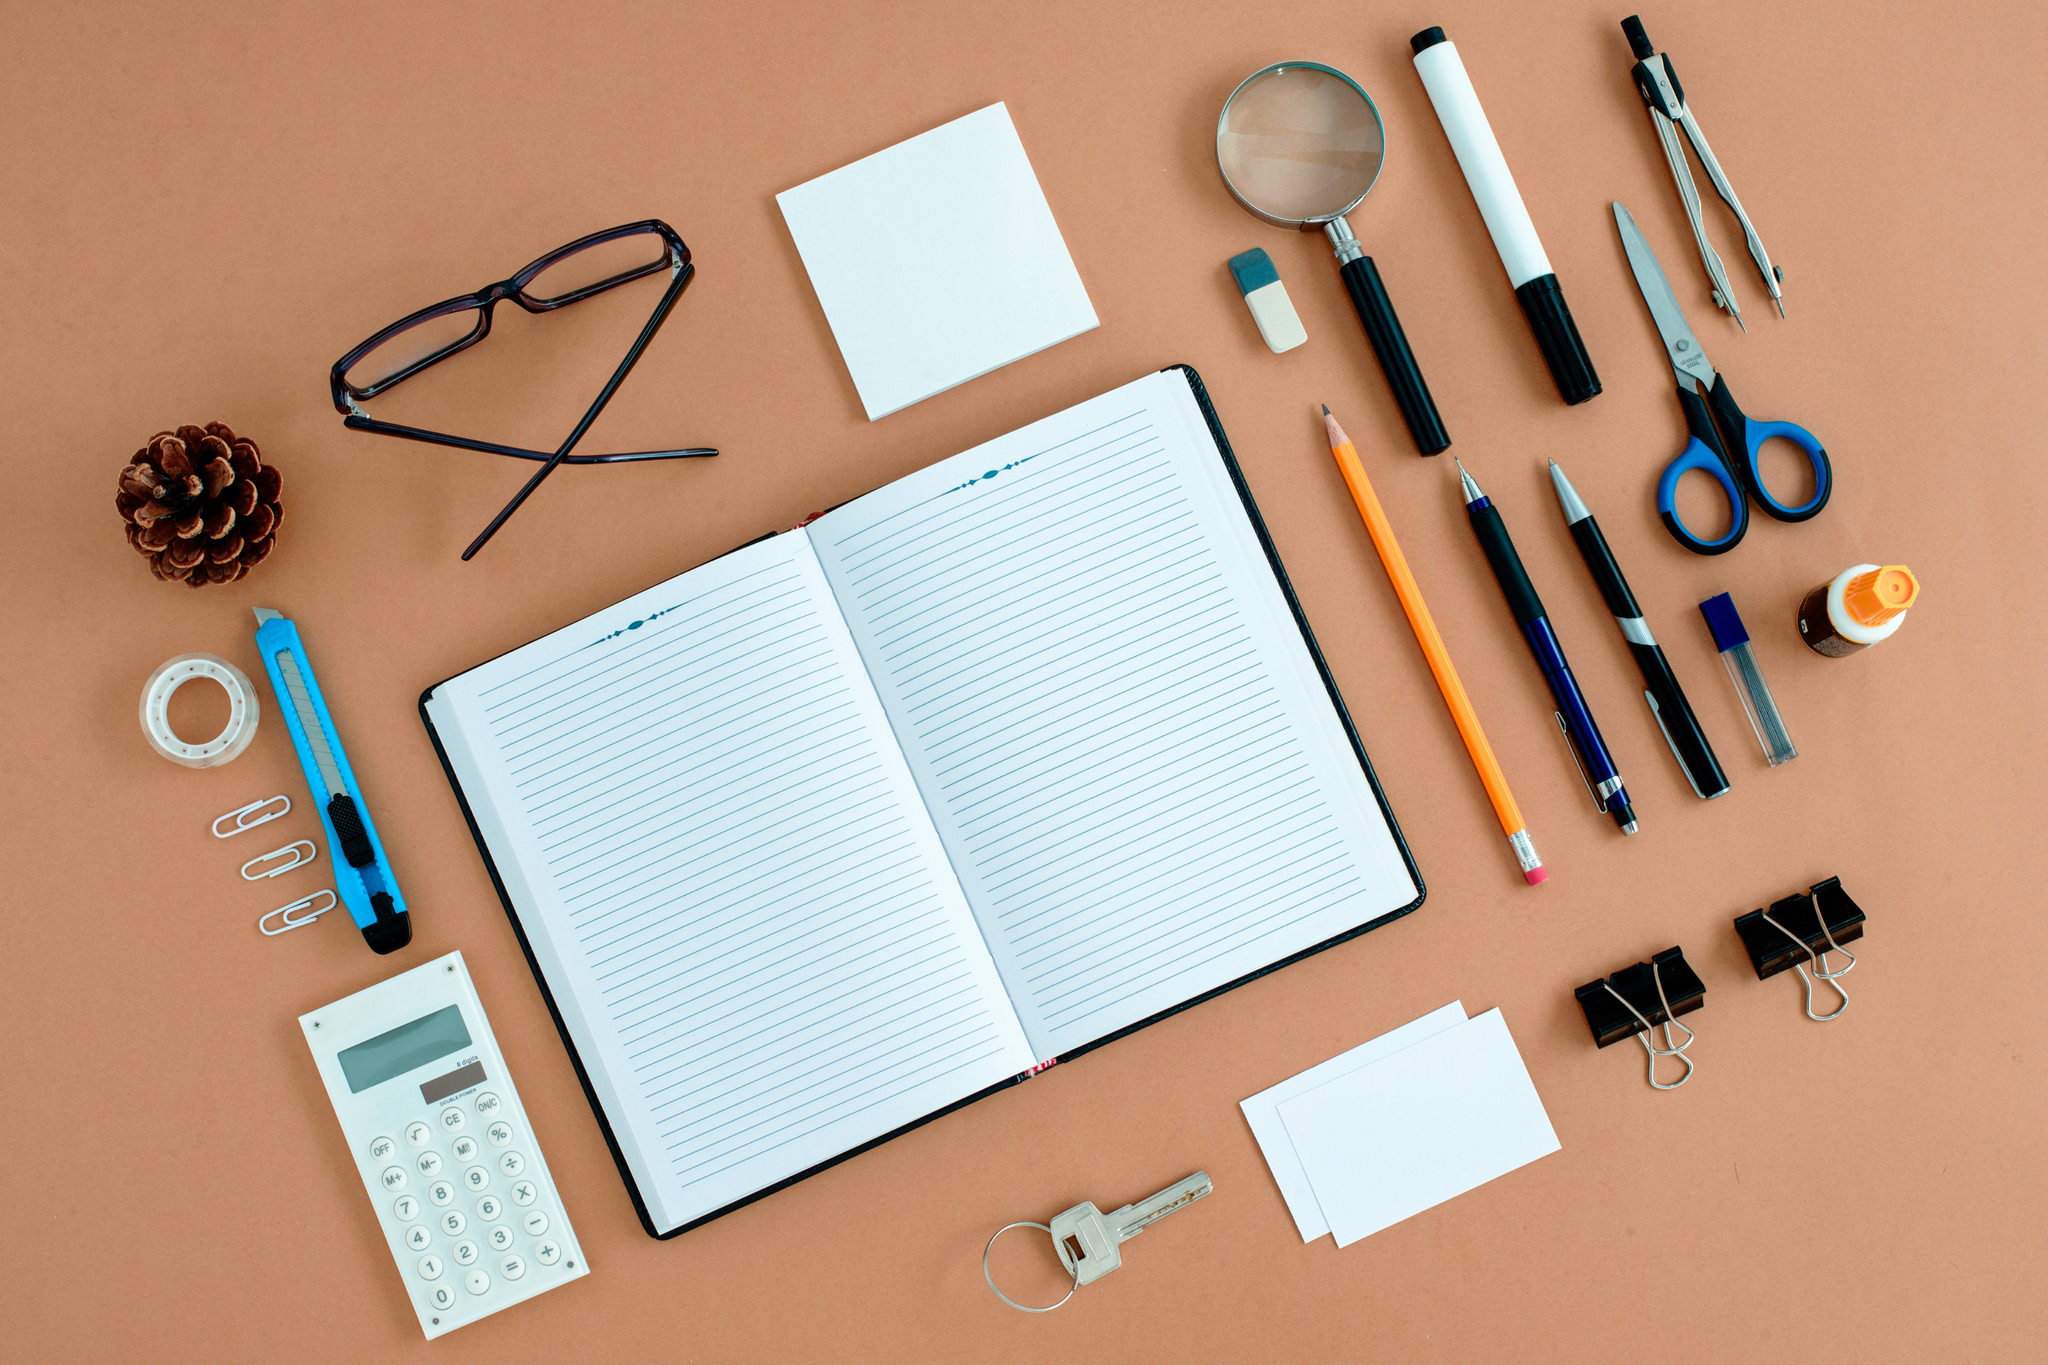 a flatlay image of items you would have in a office such as a notebook, pens, and glasses